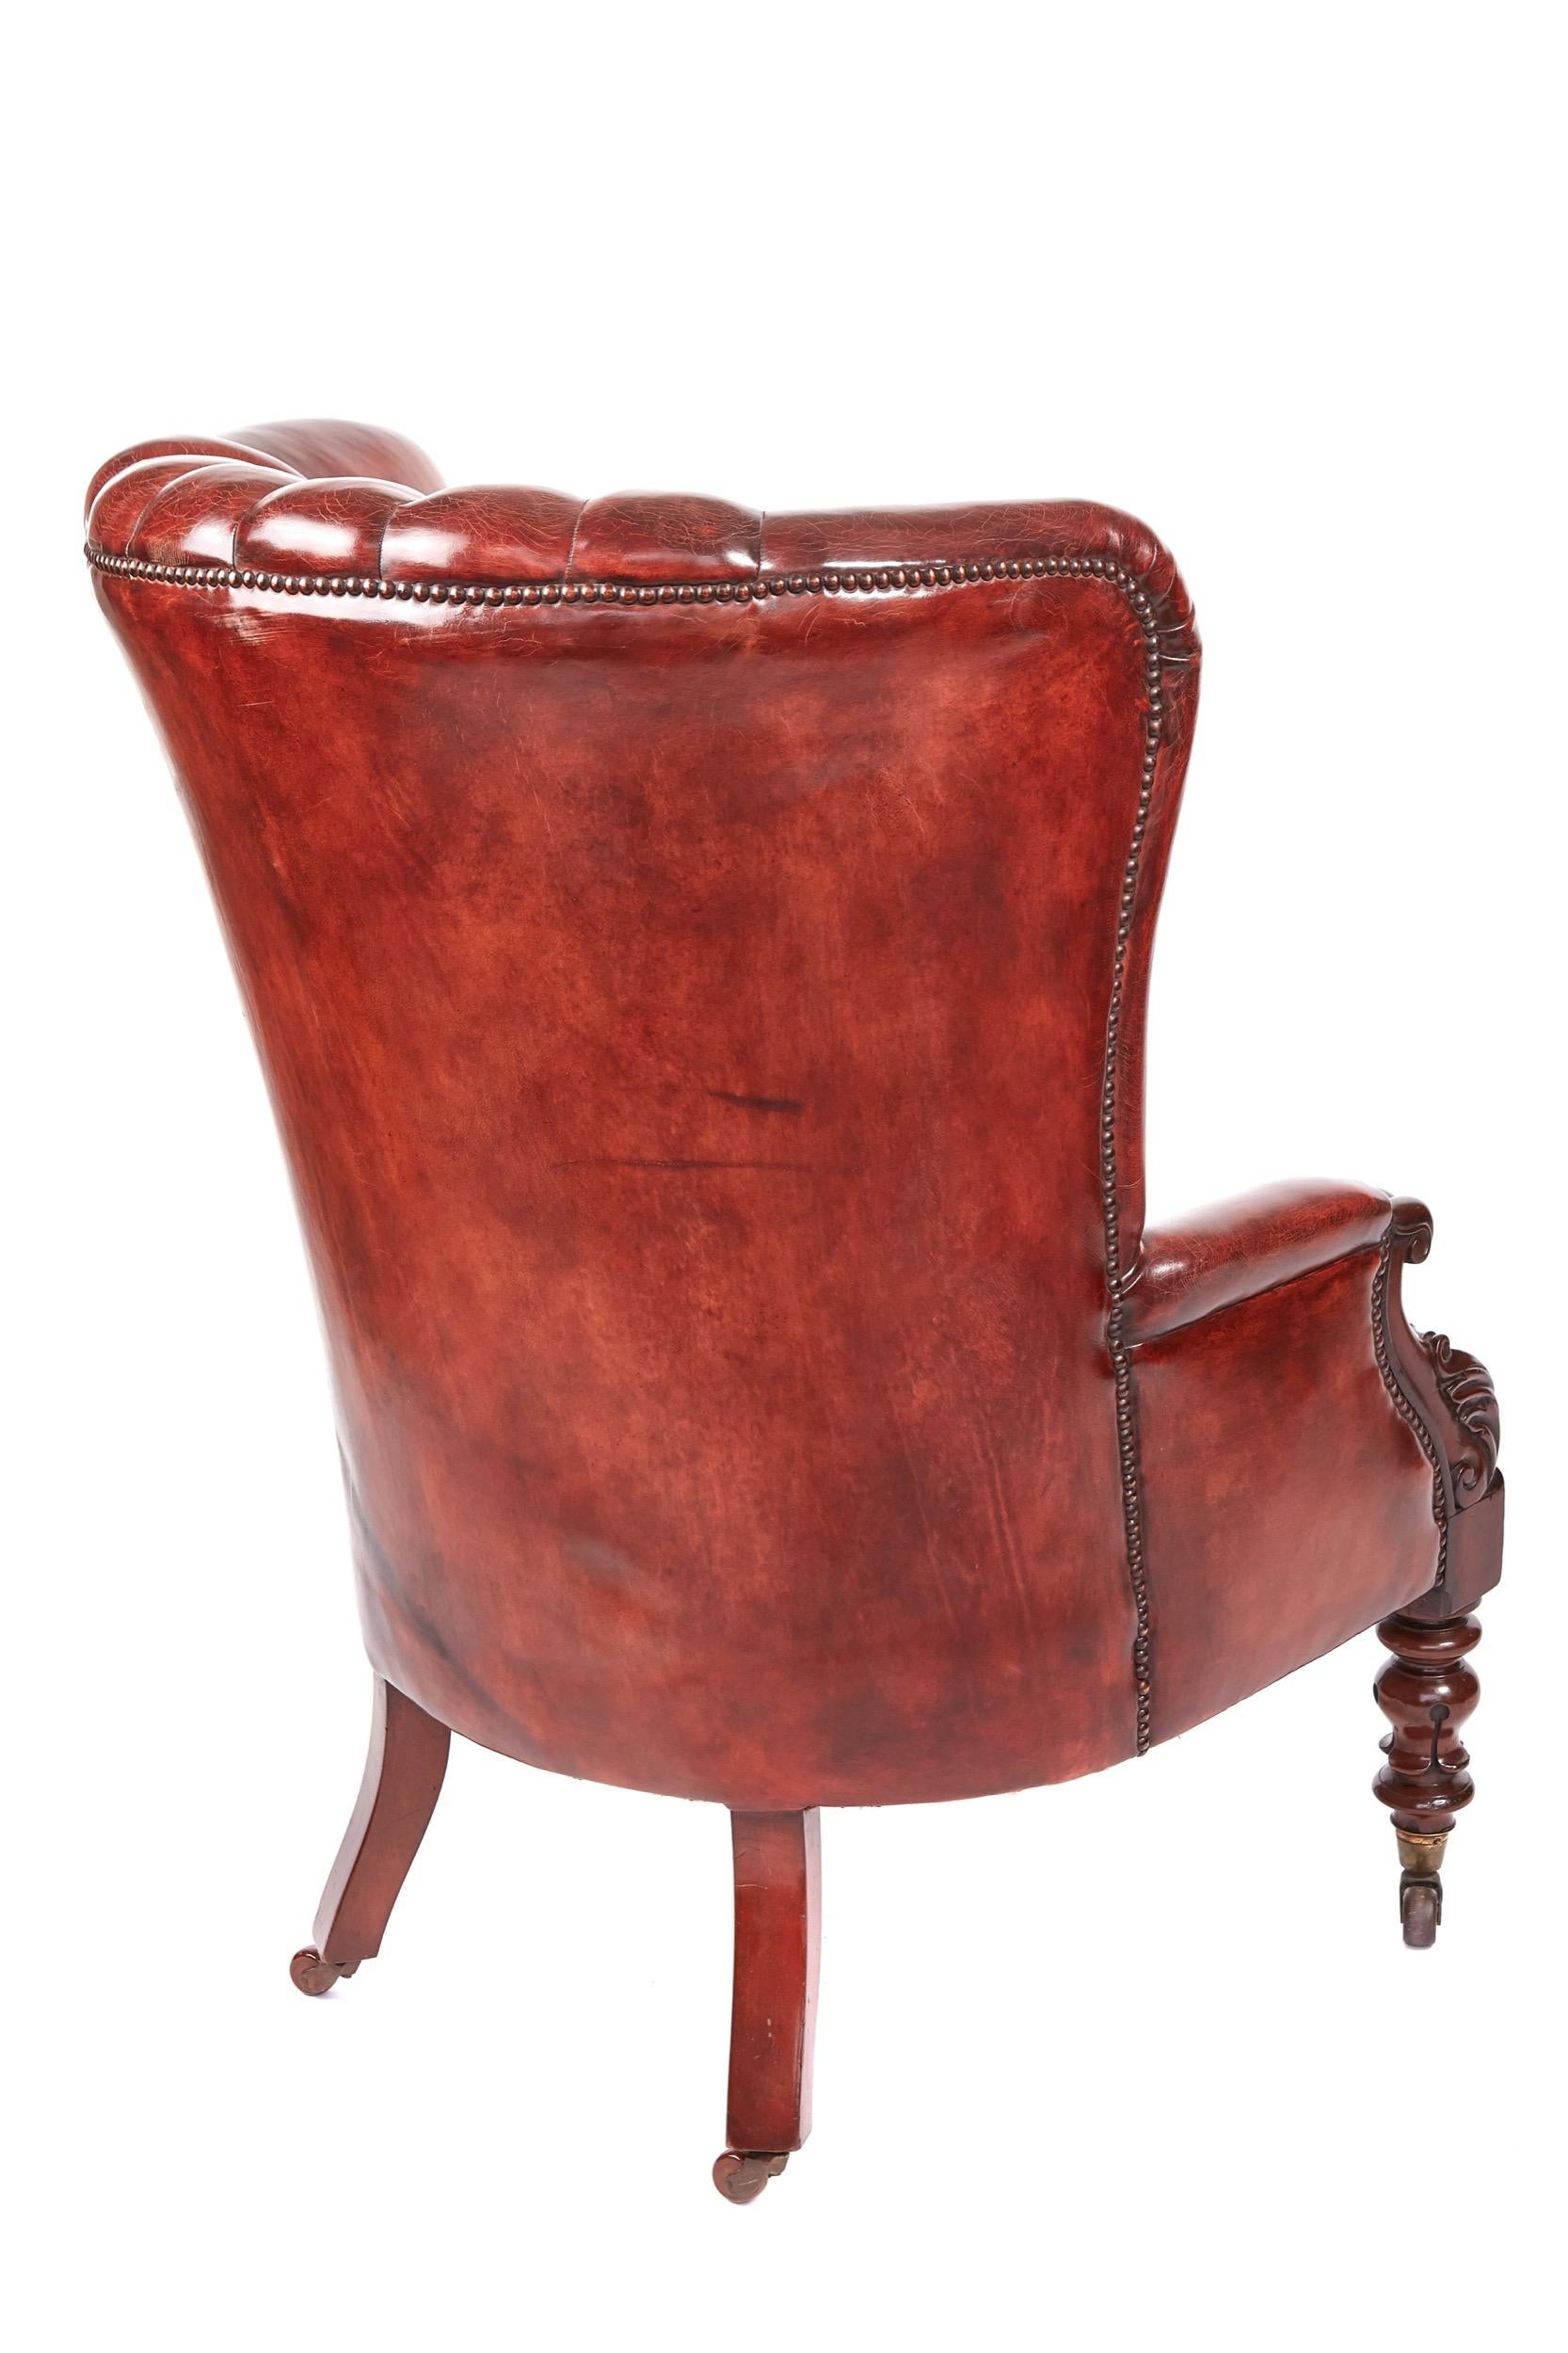 Quality William IV leather barrel back library chair, having a fantastic quality chestnut color leather barrel back, lovely quality mahogany carved arms, serpentine seat, standing on turned shaped tulip legs to the front outswept back legs, original